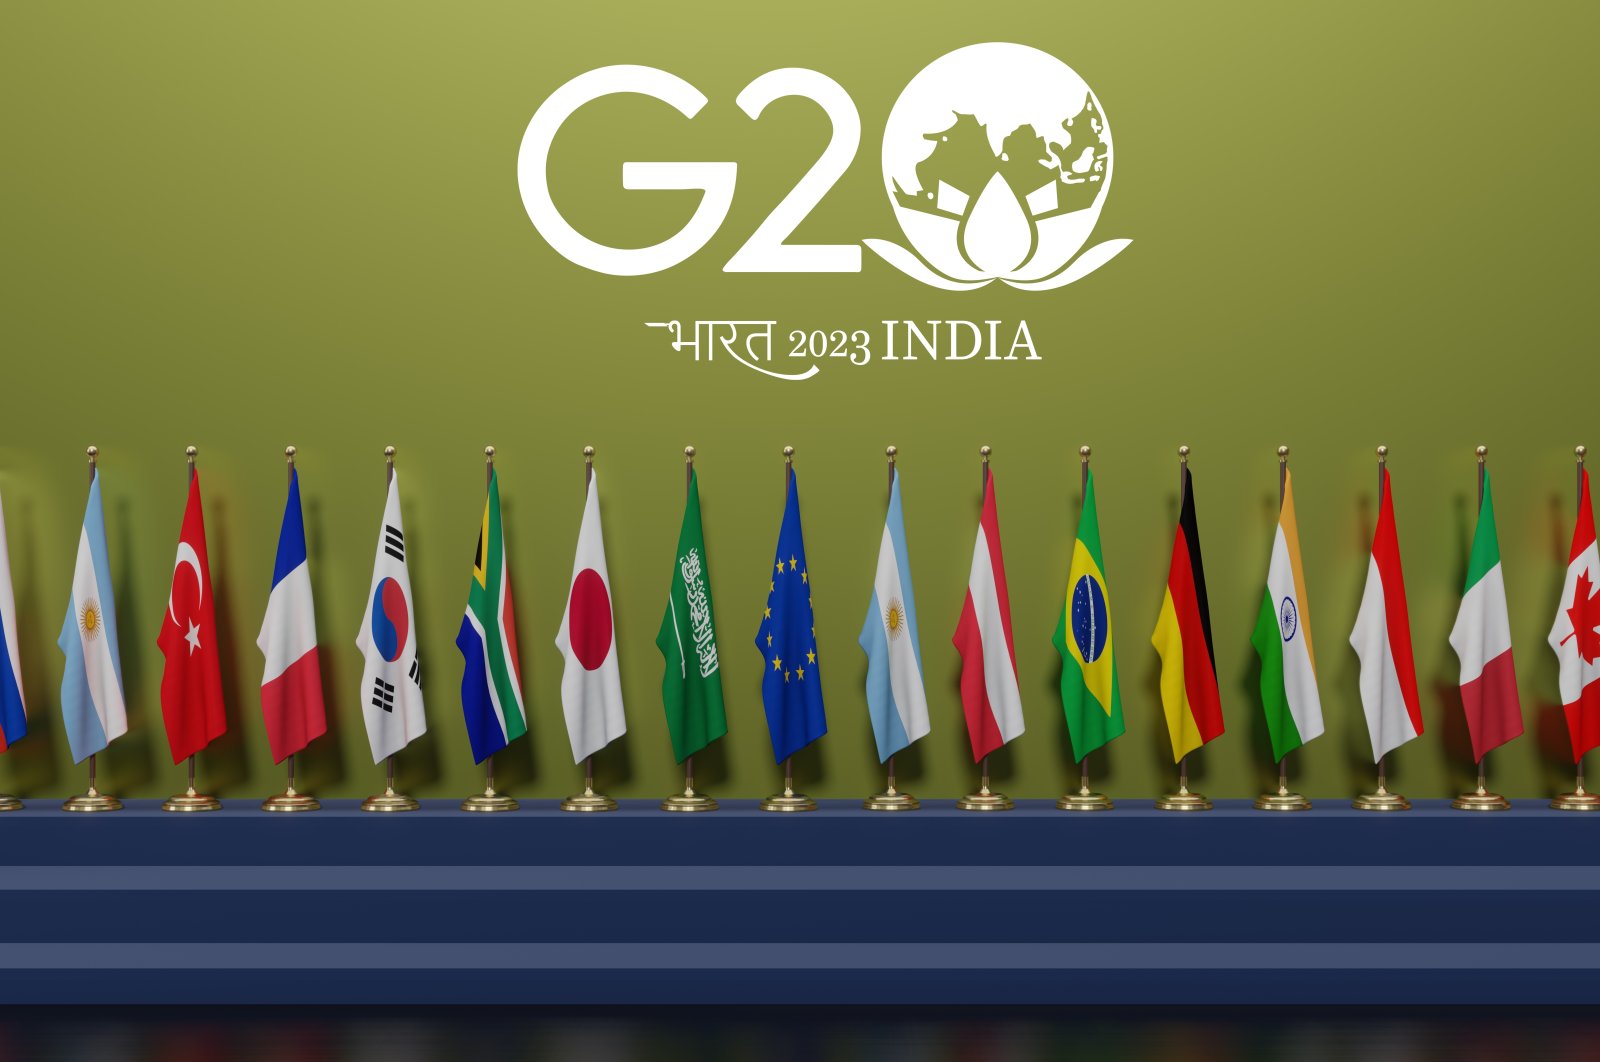 G20; Another sign of rising diversion